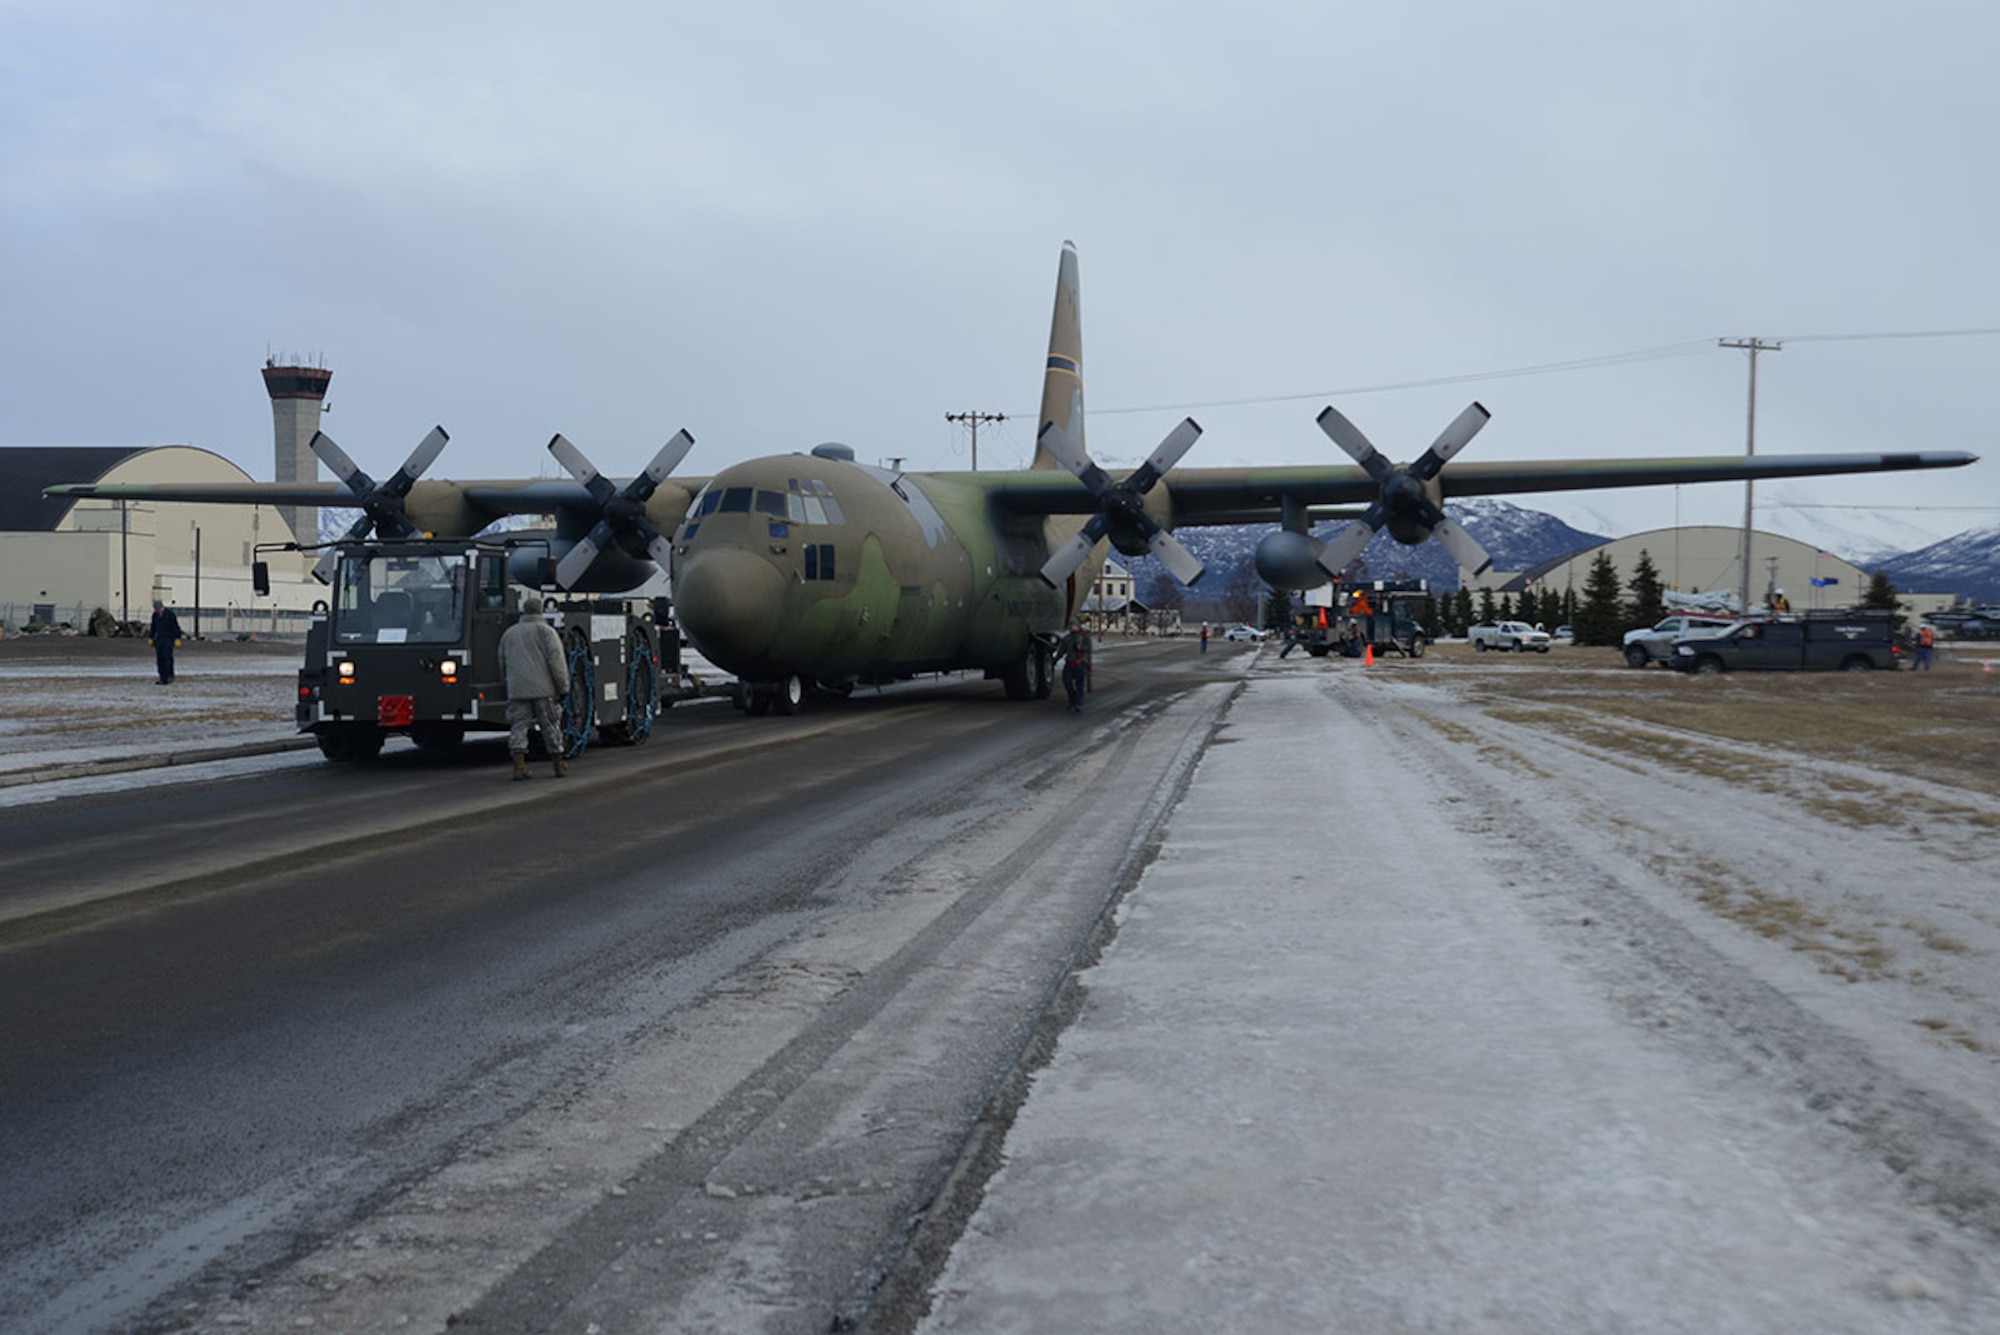 Airmen and contracted personnel work together to tow the static C-130 Hercules at Joint Base Elmendorf-Richardson Feb. 27, 2016. The aircraft has been towed to Hangar 21 for refurbishment and is scheduled to return to Heritage Park in April. (U.S. Air Force photo by Airman 1st Class Christopher R. Morales)